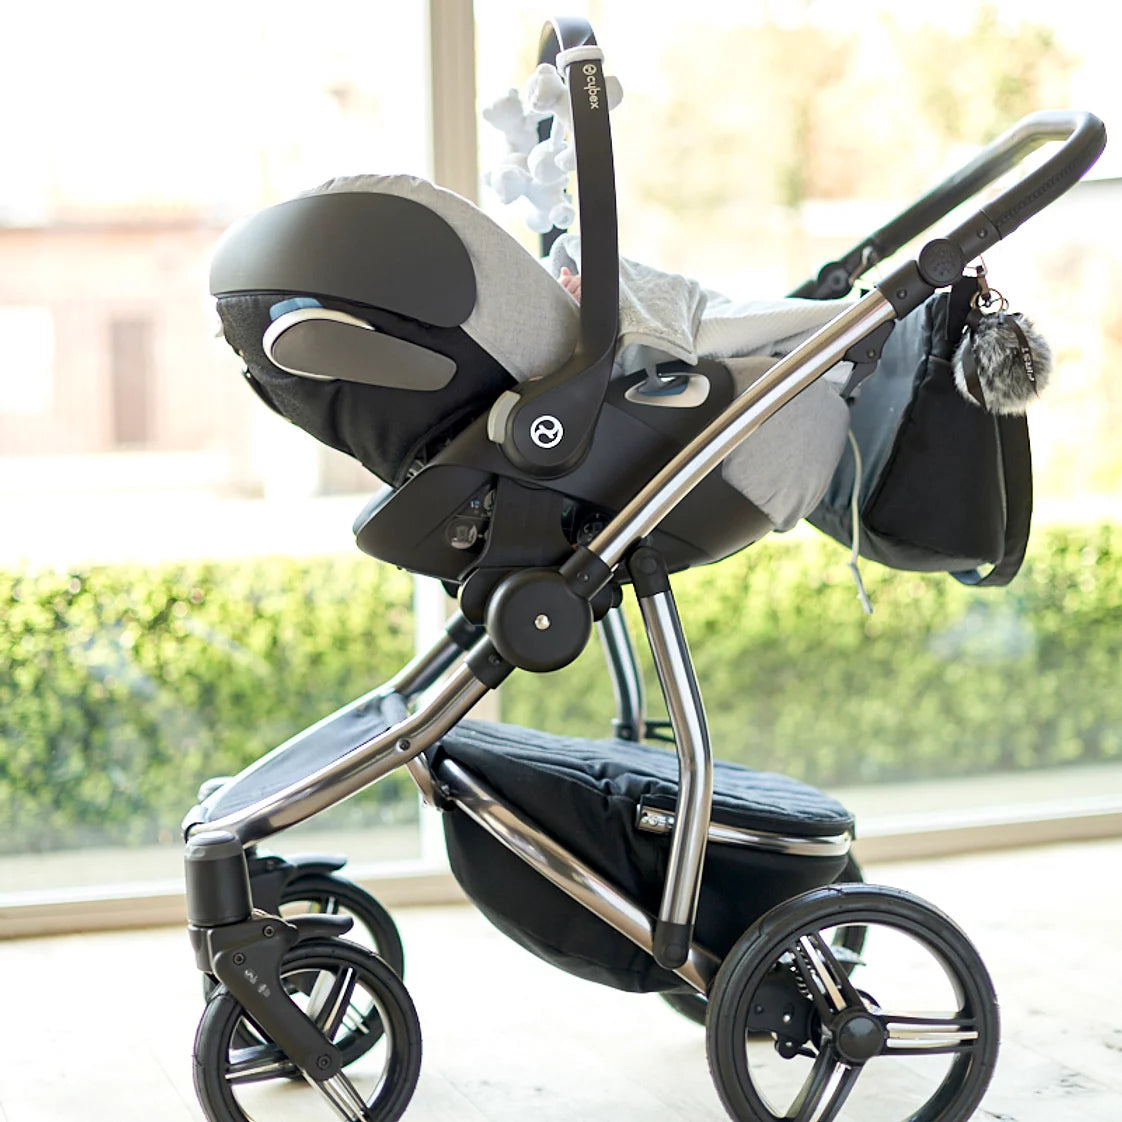 First Endless Grey Cover for Cybex Car Seat